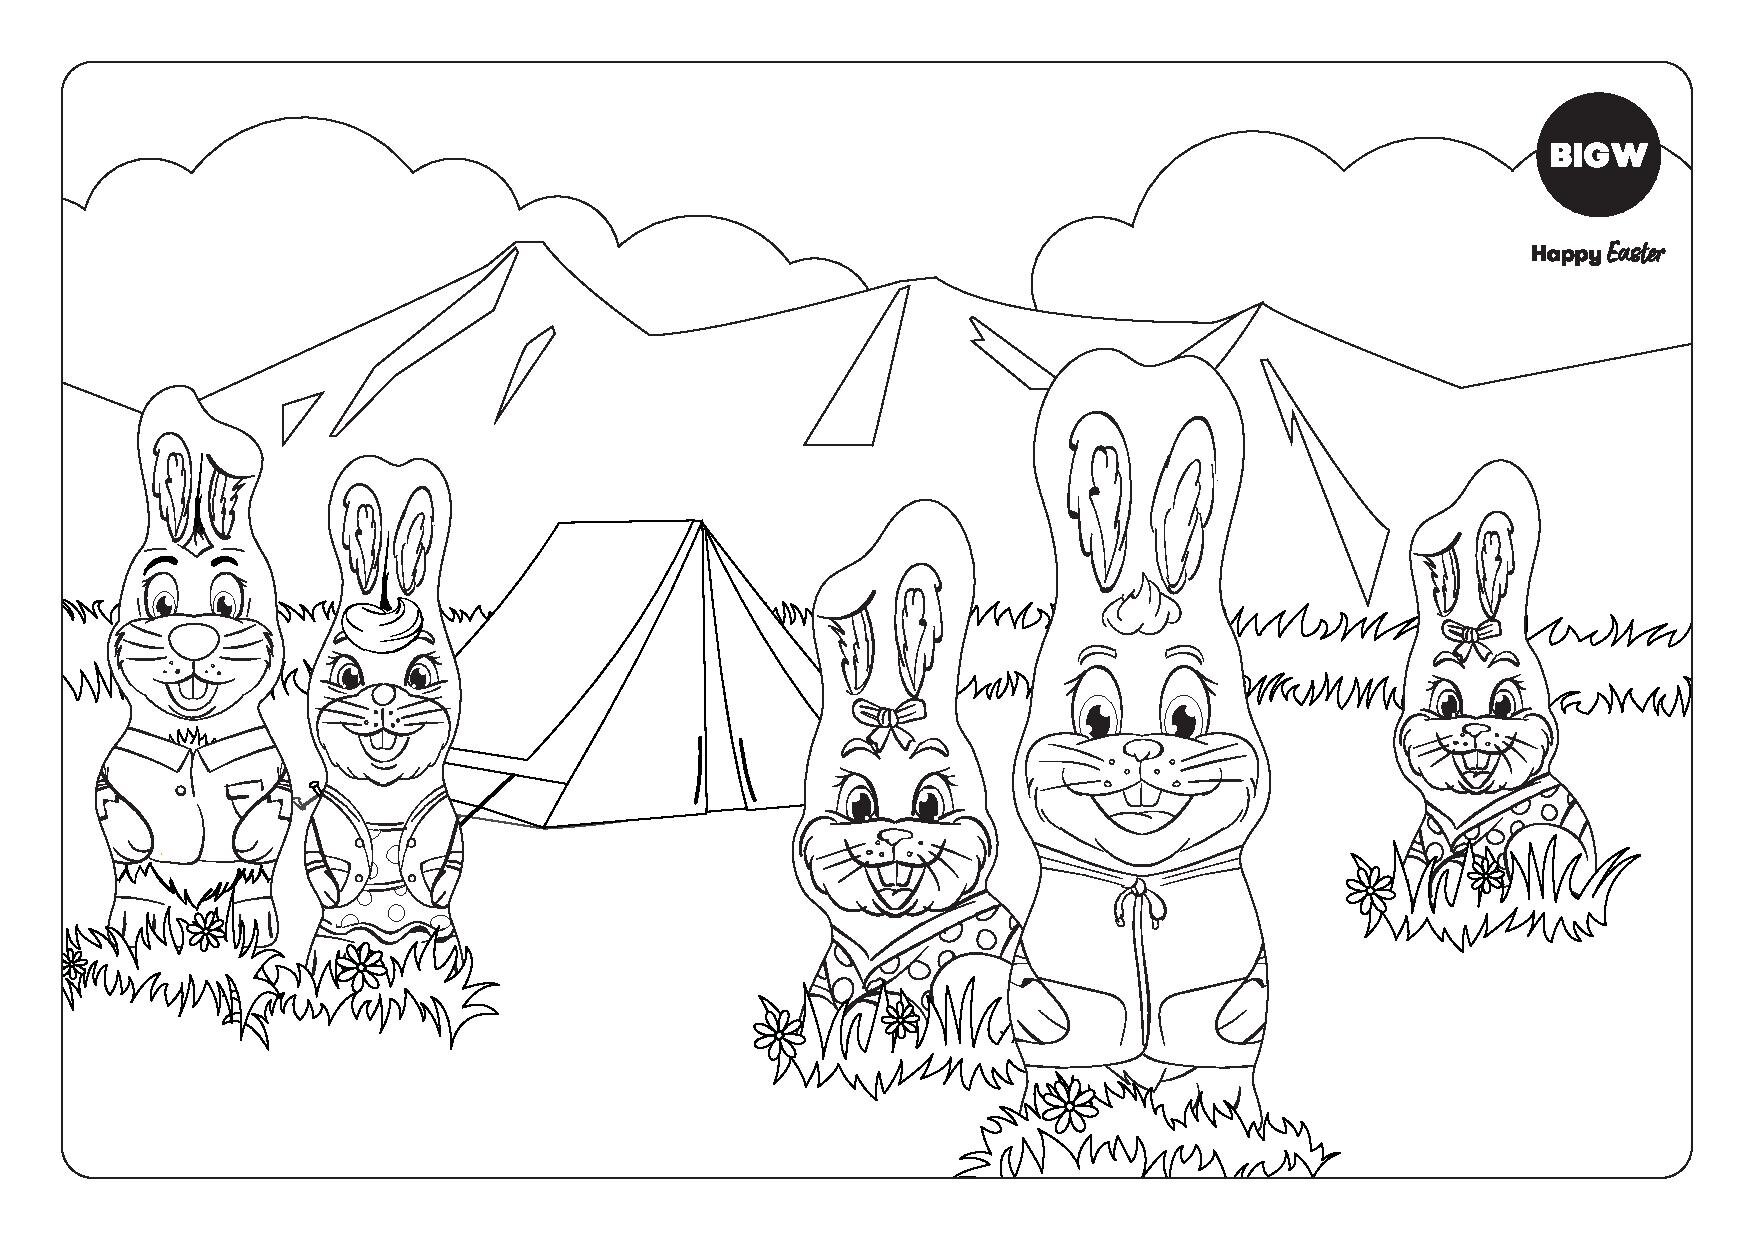 BIGW_ColouringBookA4_Approved 2-page-003.jpg